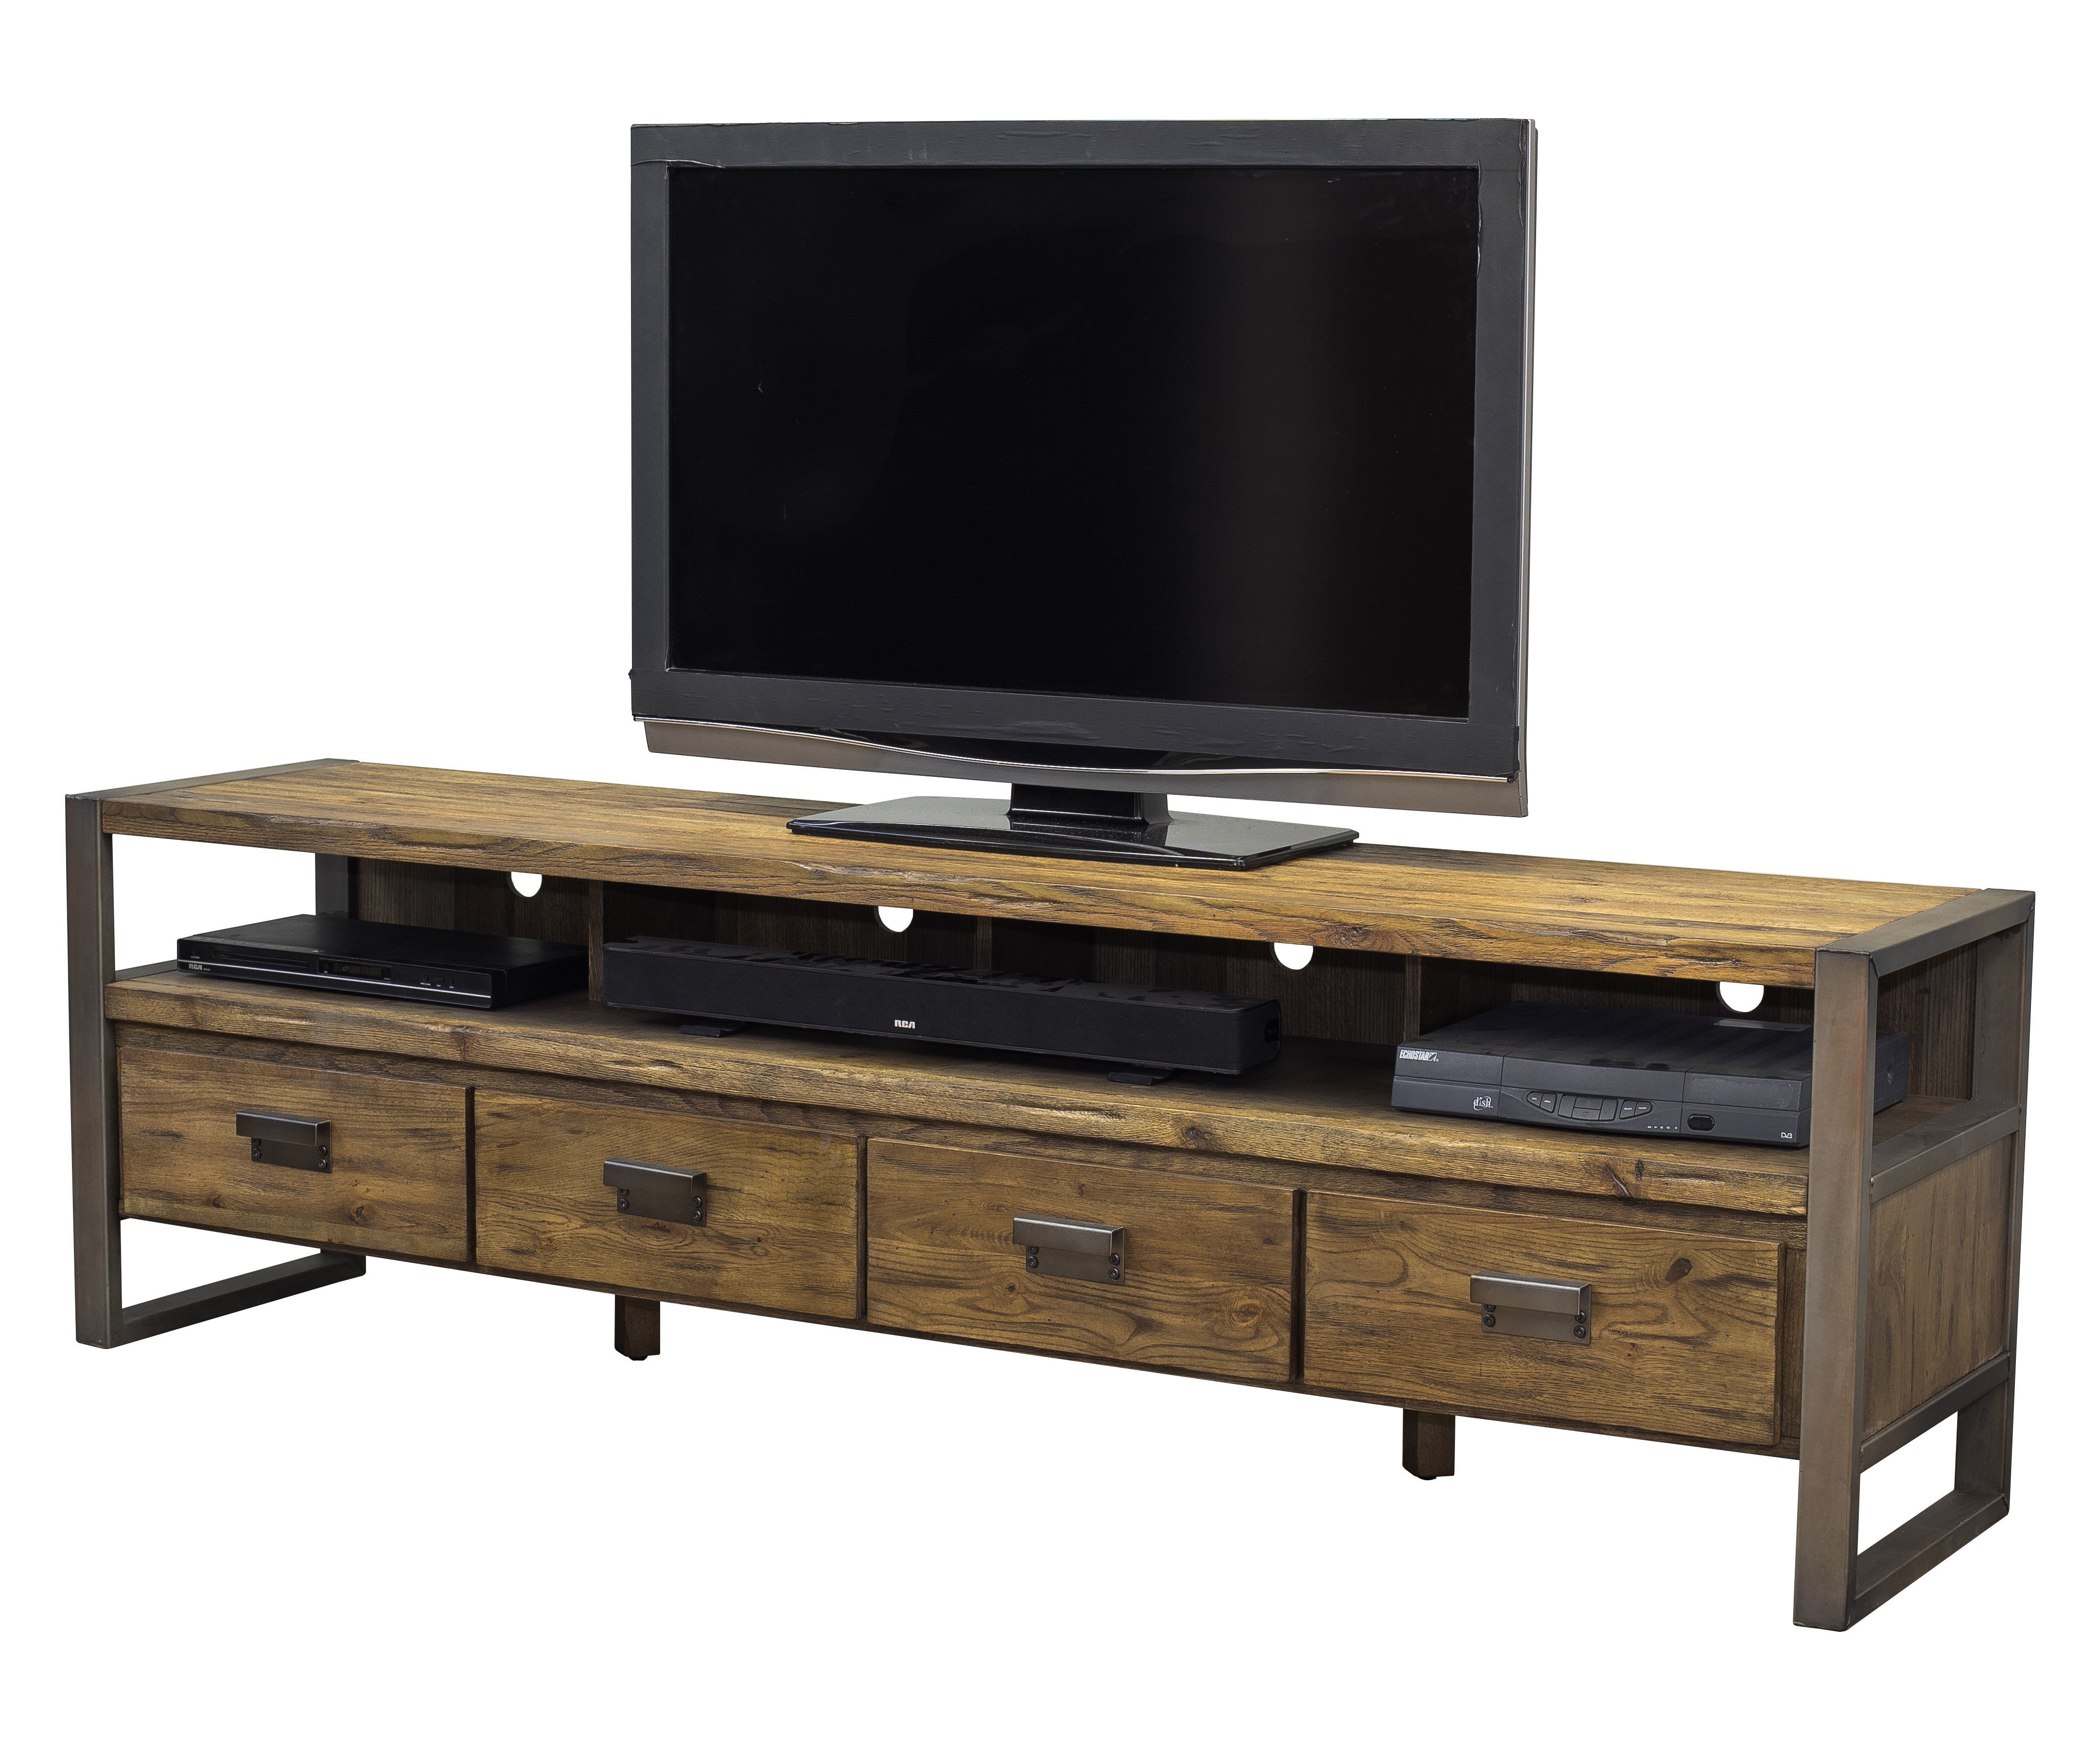 Assembled Tv Stands | Joss & Main Pertaining To Walton 74 Inch Open Tv Stands (View 5 of 30)